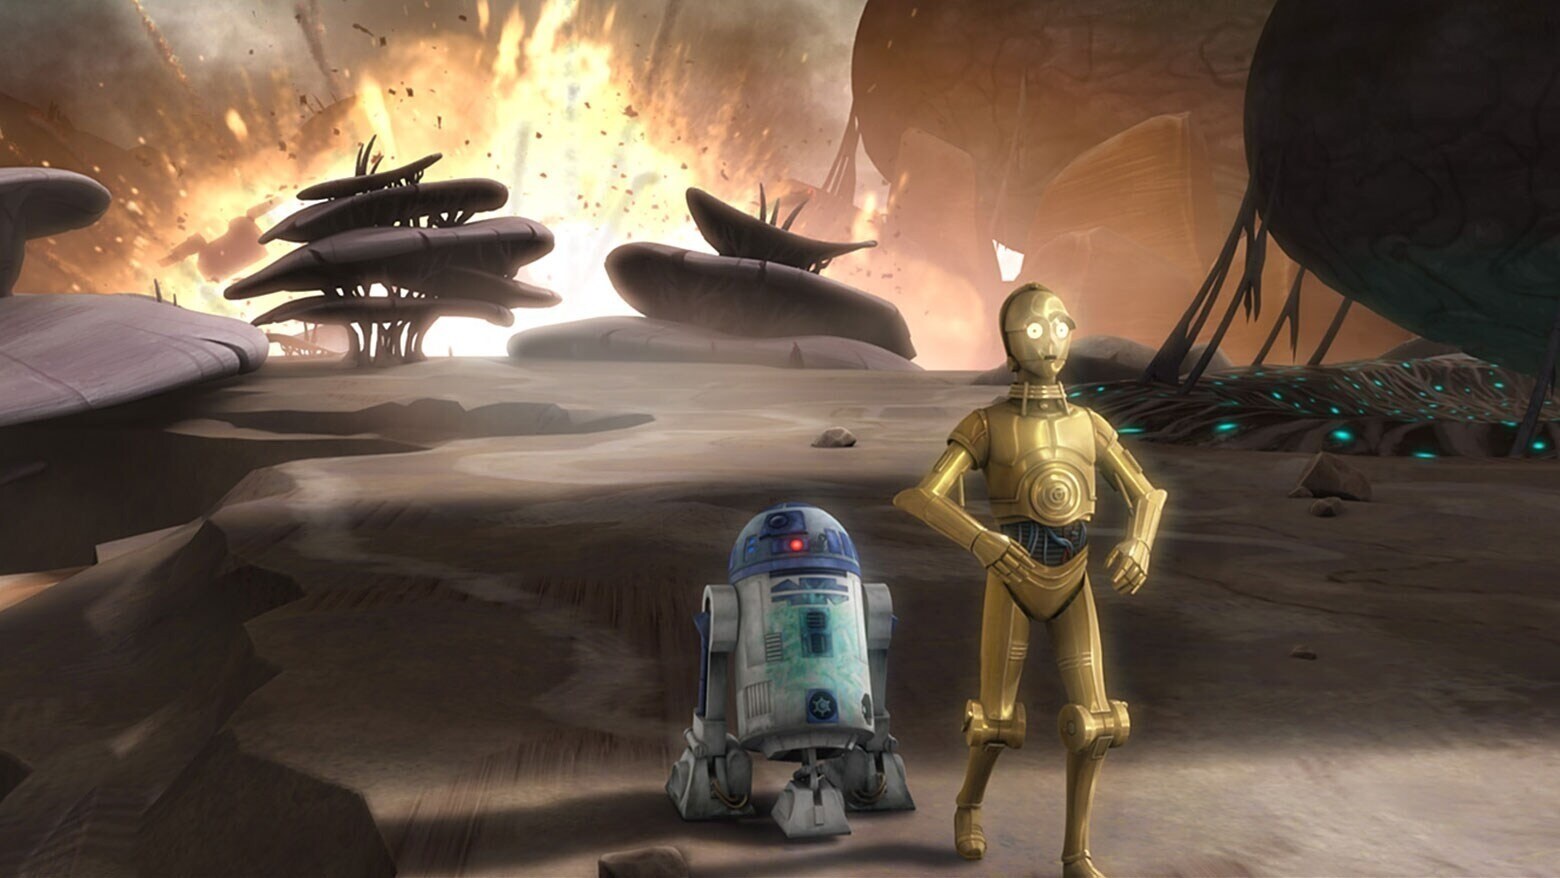 C-3PO and R2-D2's standing in front of an explosion in the distant background in The Clone Wars